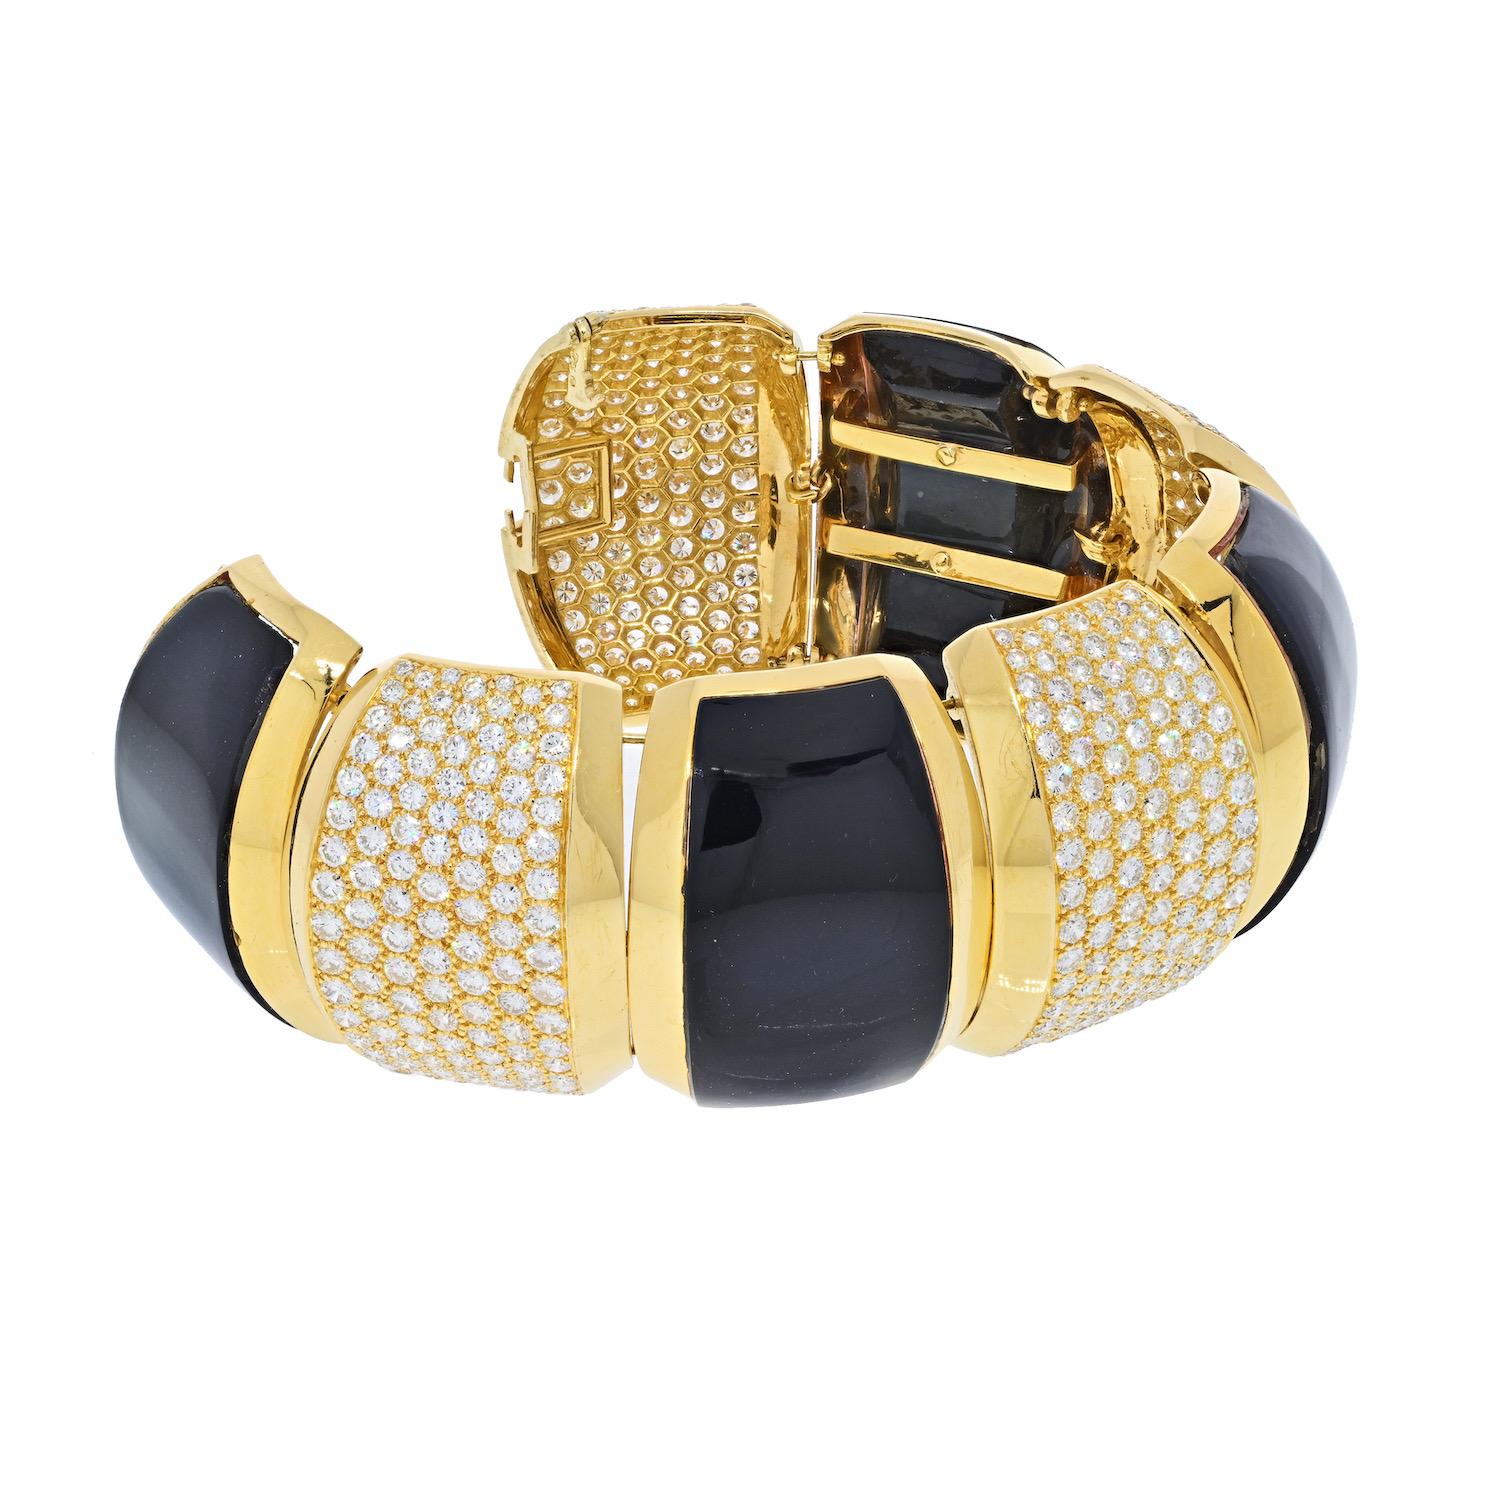 Vintage (c.1980s) chunky bracelet made of 18K Yellow Gold, diamonds and black agate. Hammerman Brothers. A substantial creation, rendered in 18 karat yellow gold with polished segments of agate together with sections set of brilliant white diamonds.